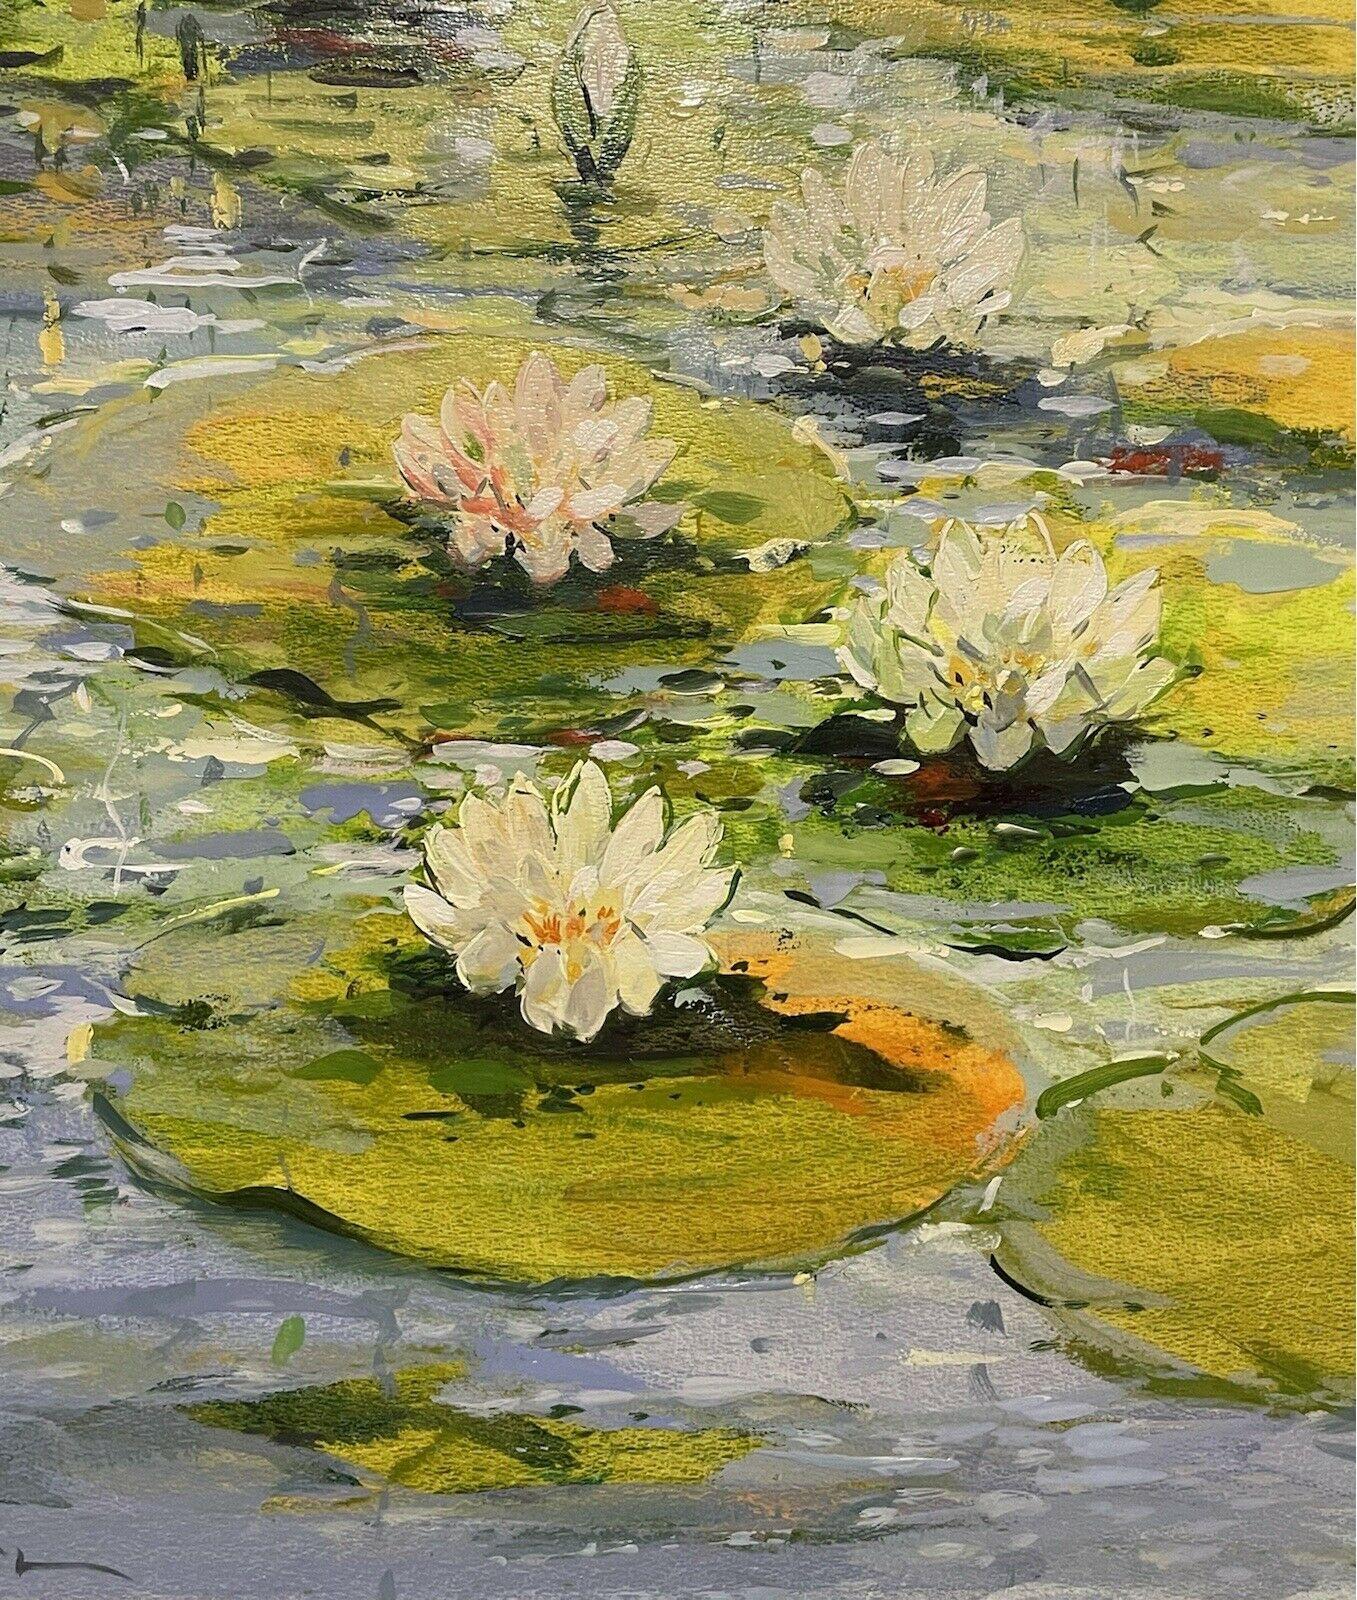 LARGE IMPRESSIONIST SIGNED PAINTING - THE WATERLILY POND - Impressionist Painting by Robert de Haan